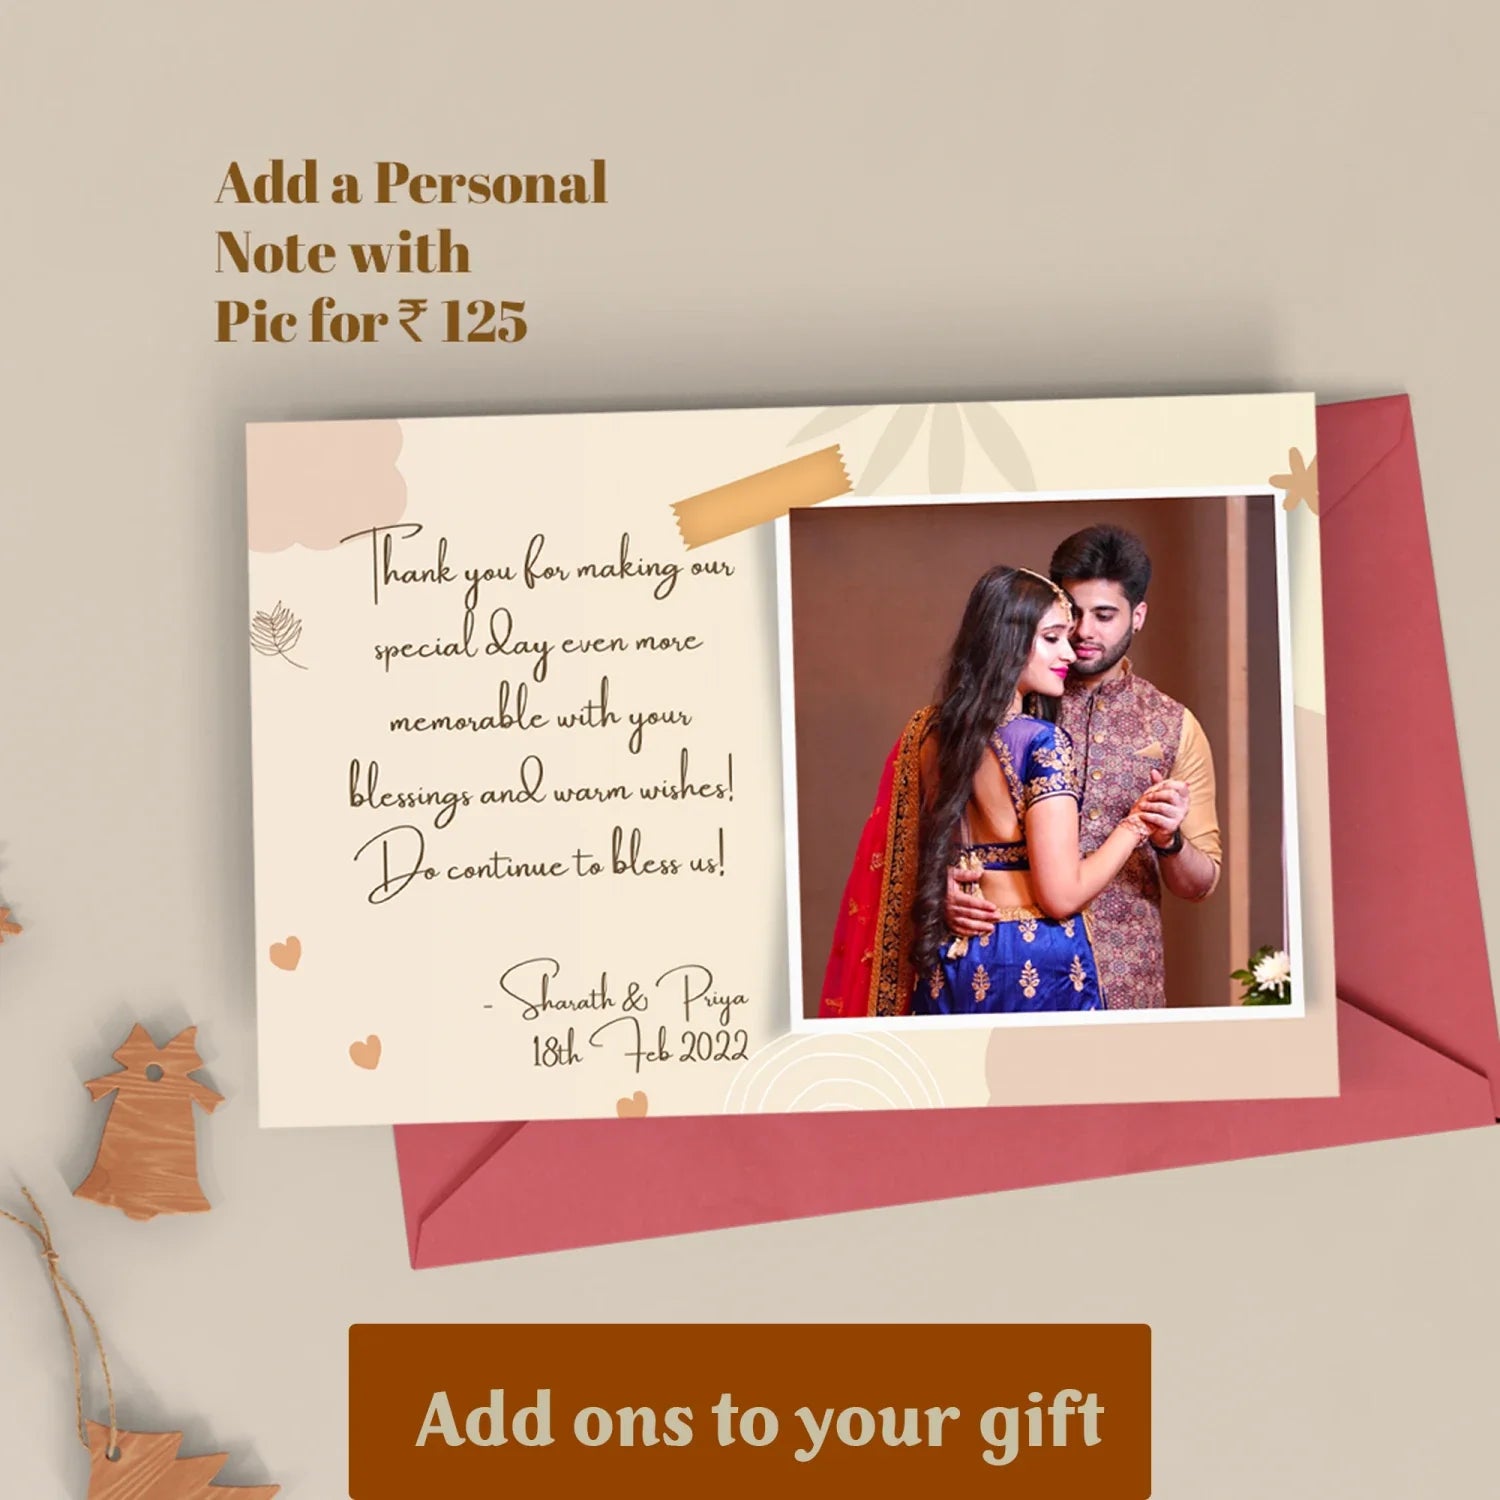 Personalized Men's Combo (3 pcs) - Brown. Add your personal note and polaroid picture to customise the gifts and give it a personal touch.